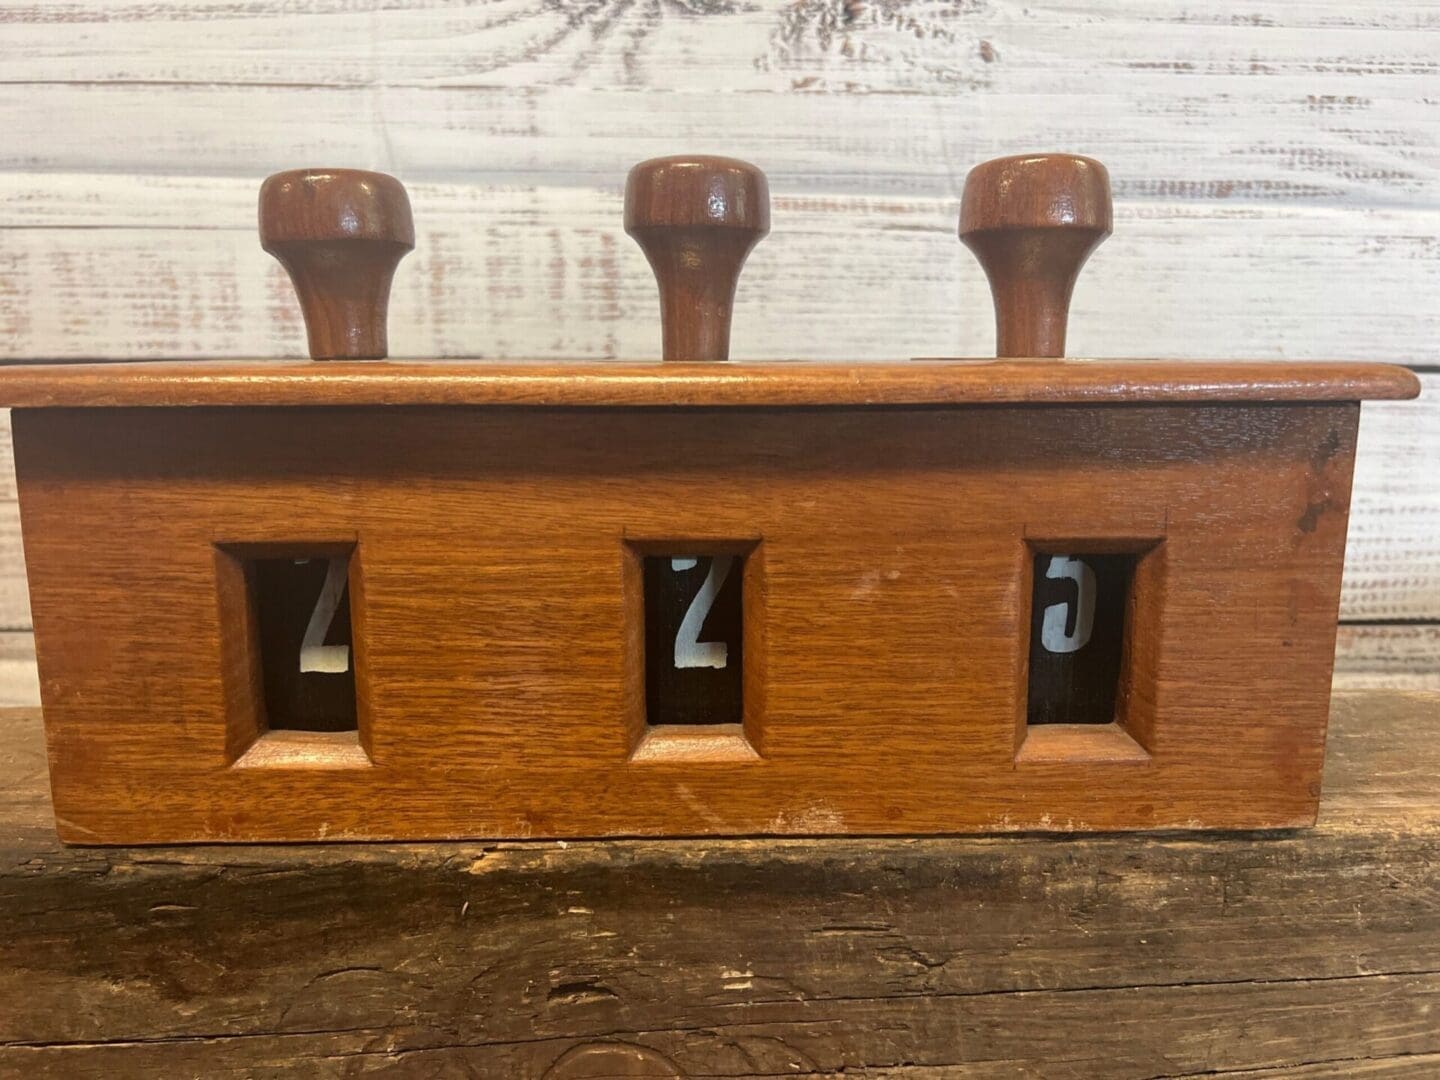 A wooden box with numbers on it